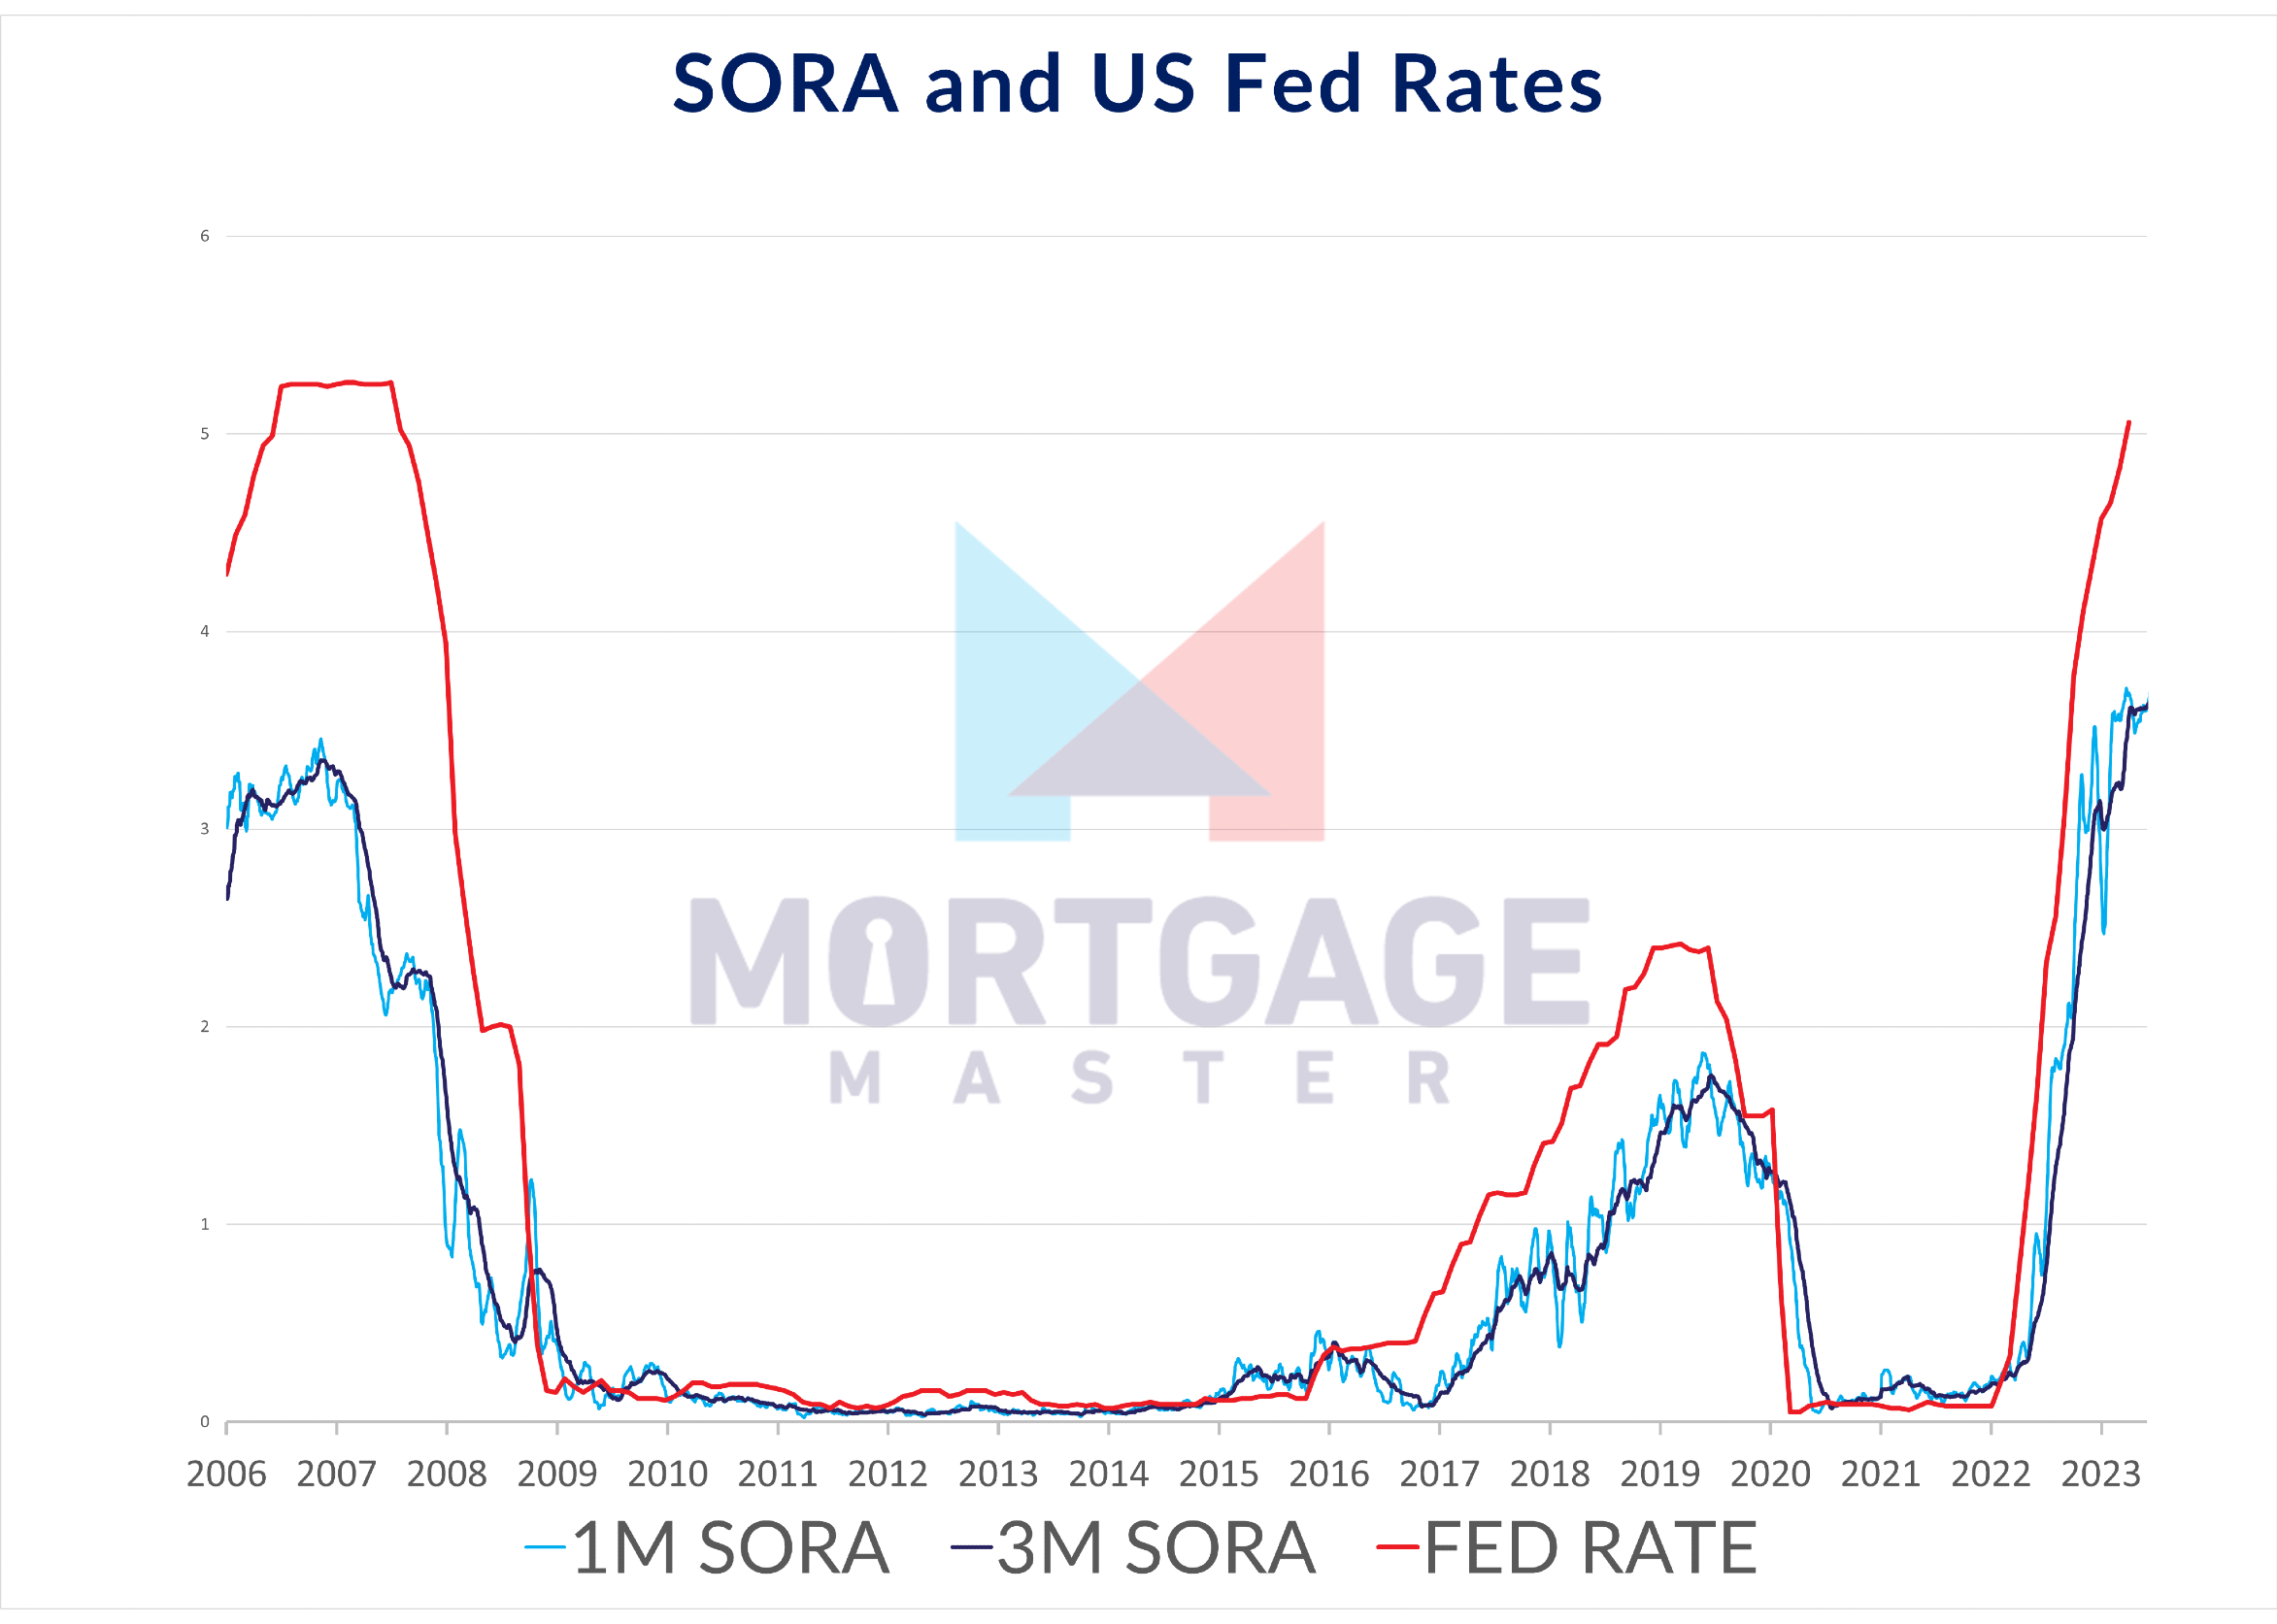 How SORA in Singapore relates to the US Fed Rates